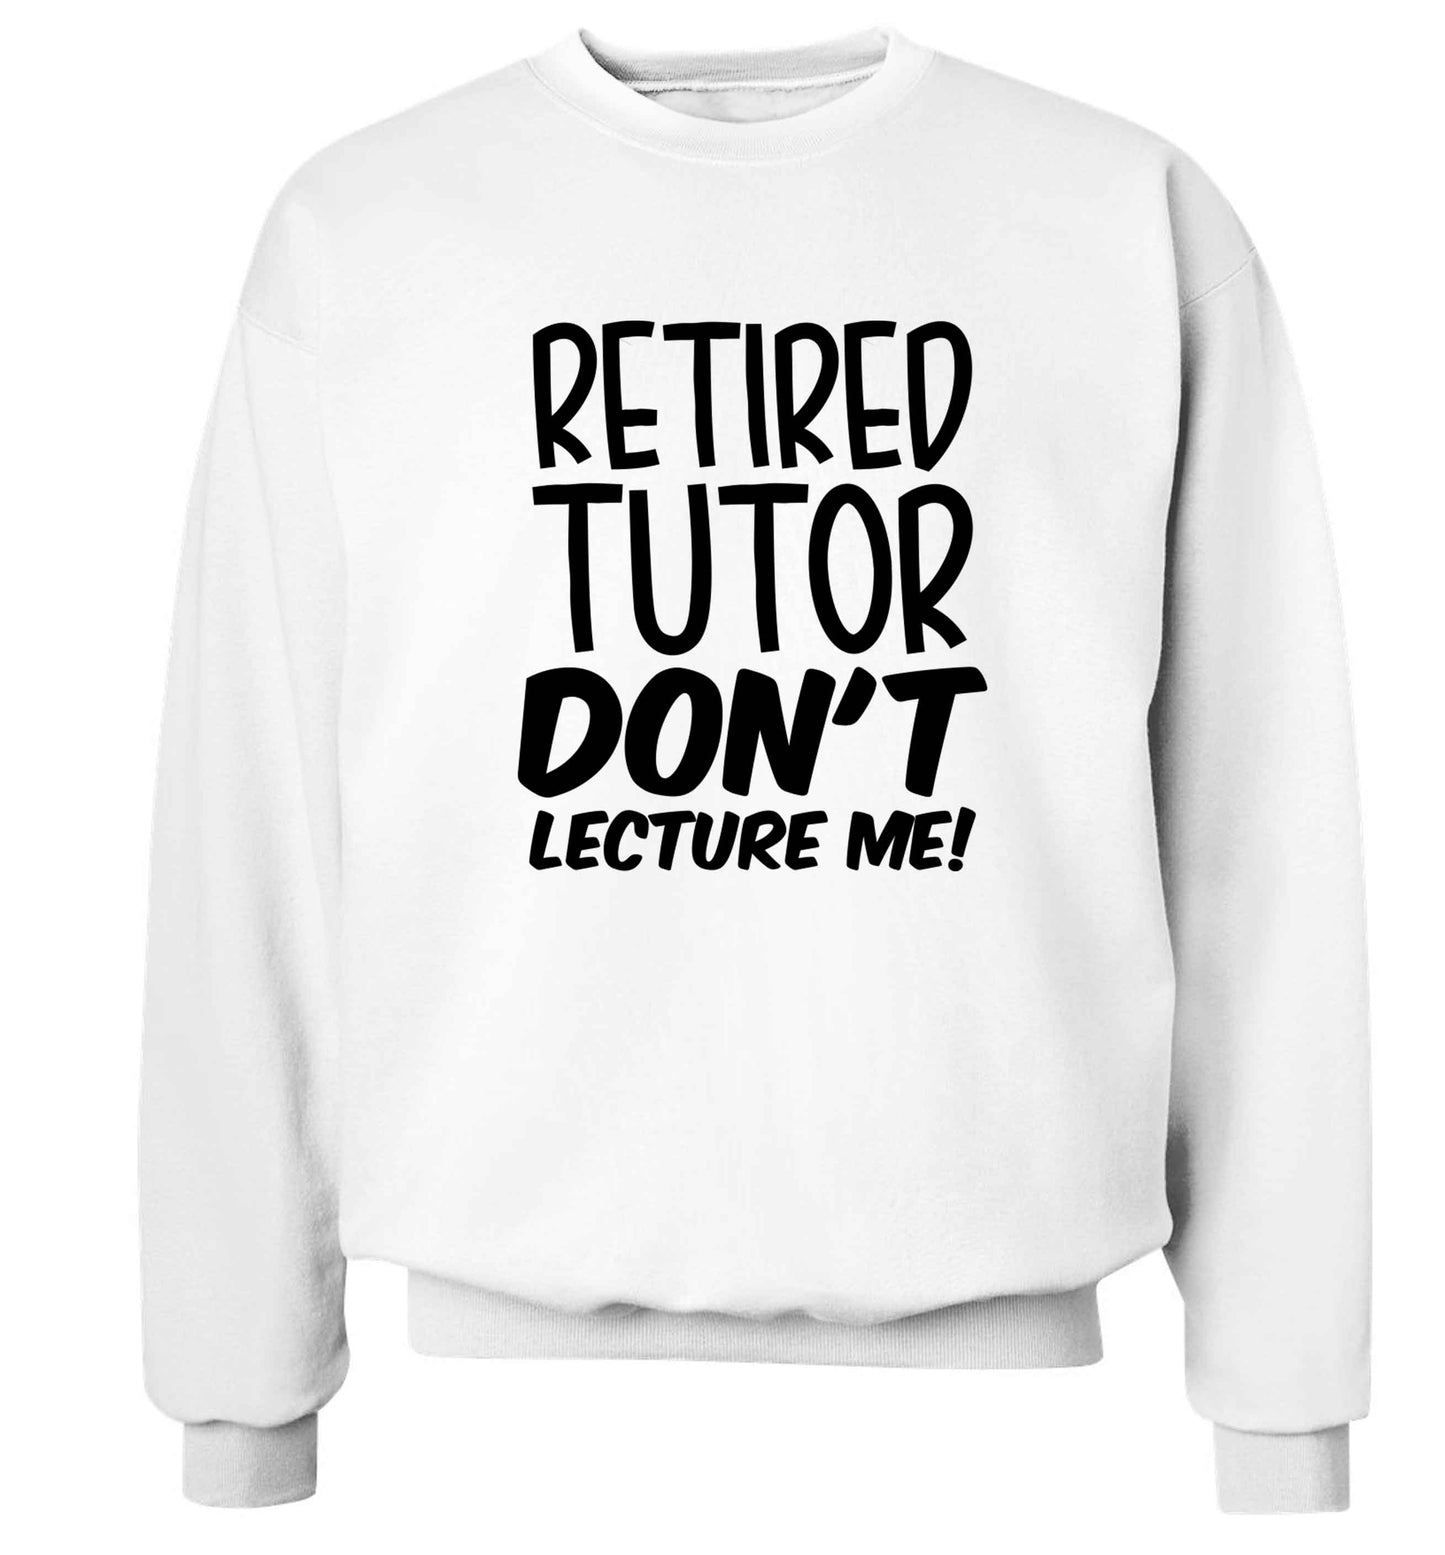 Retired tutor don't lecture me! Adult's unisex white Sweater 2XL